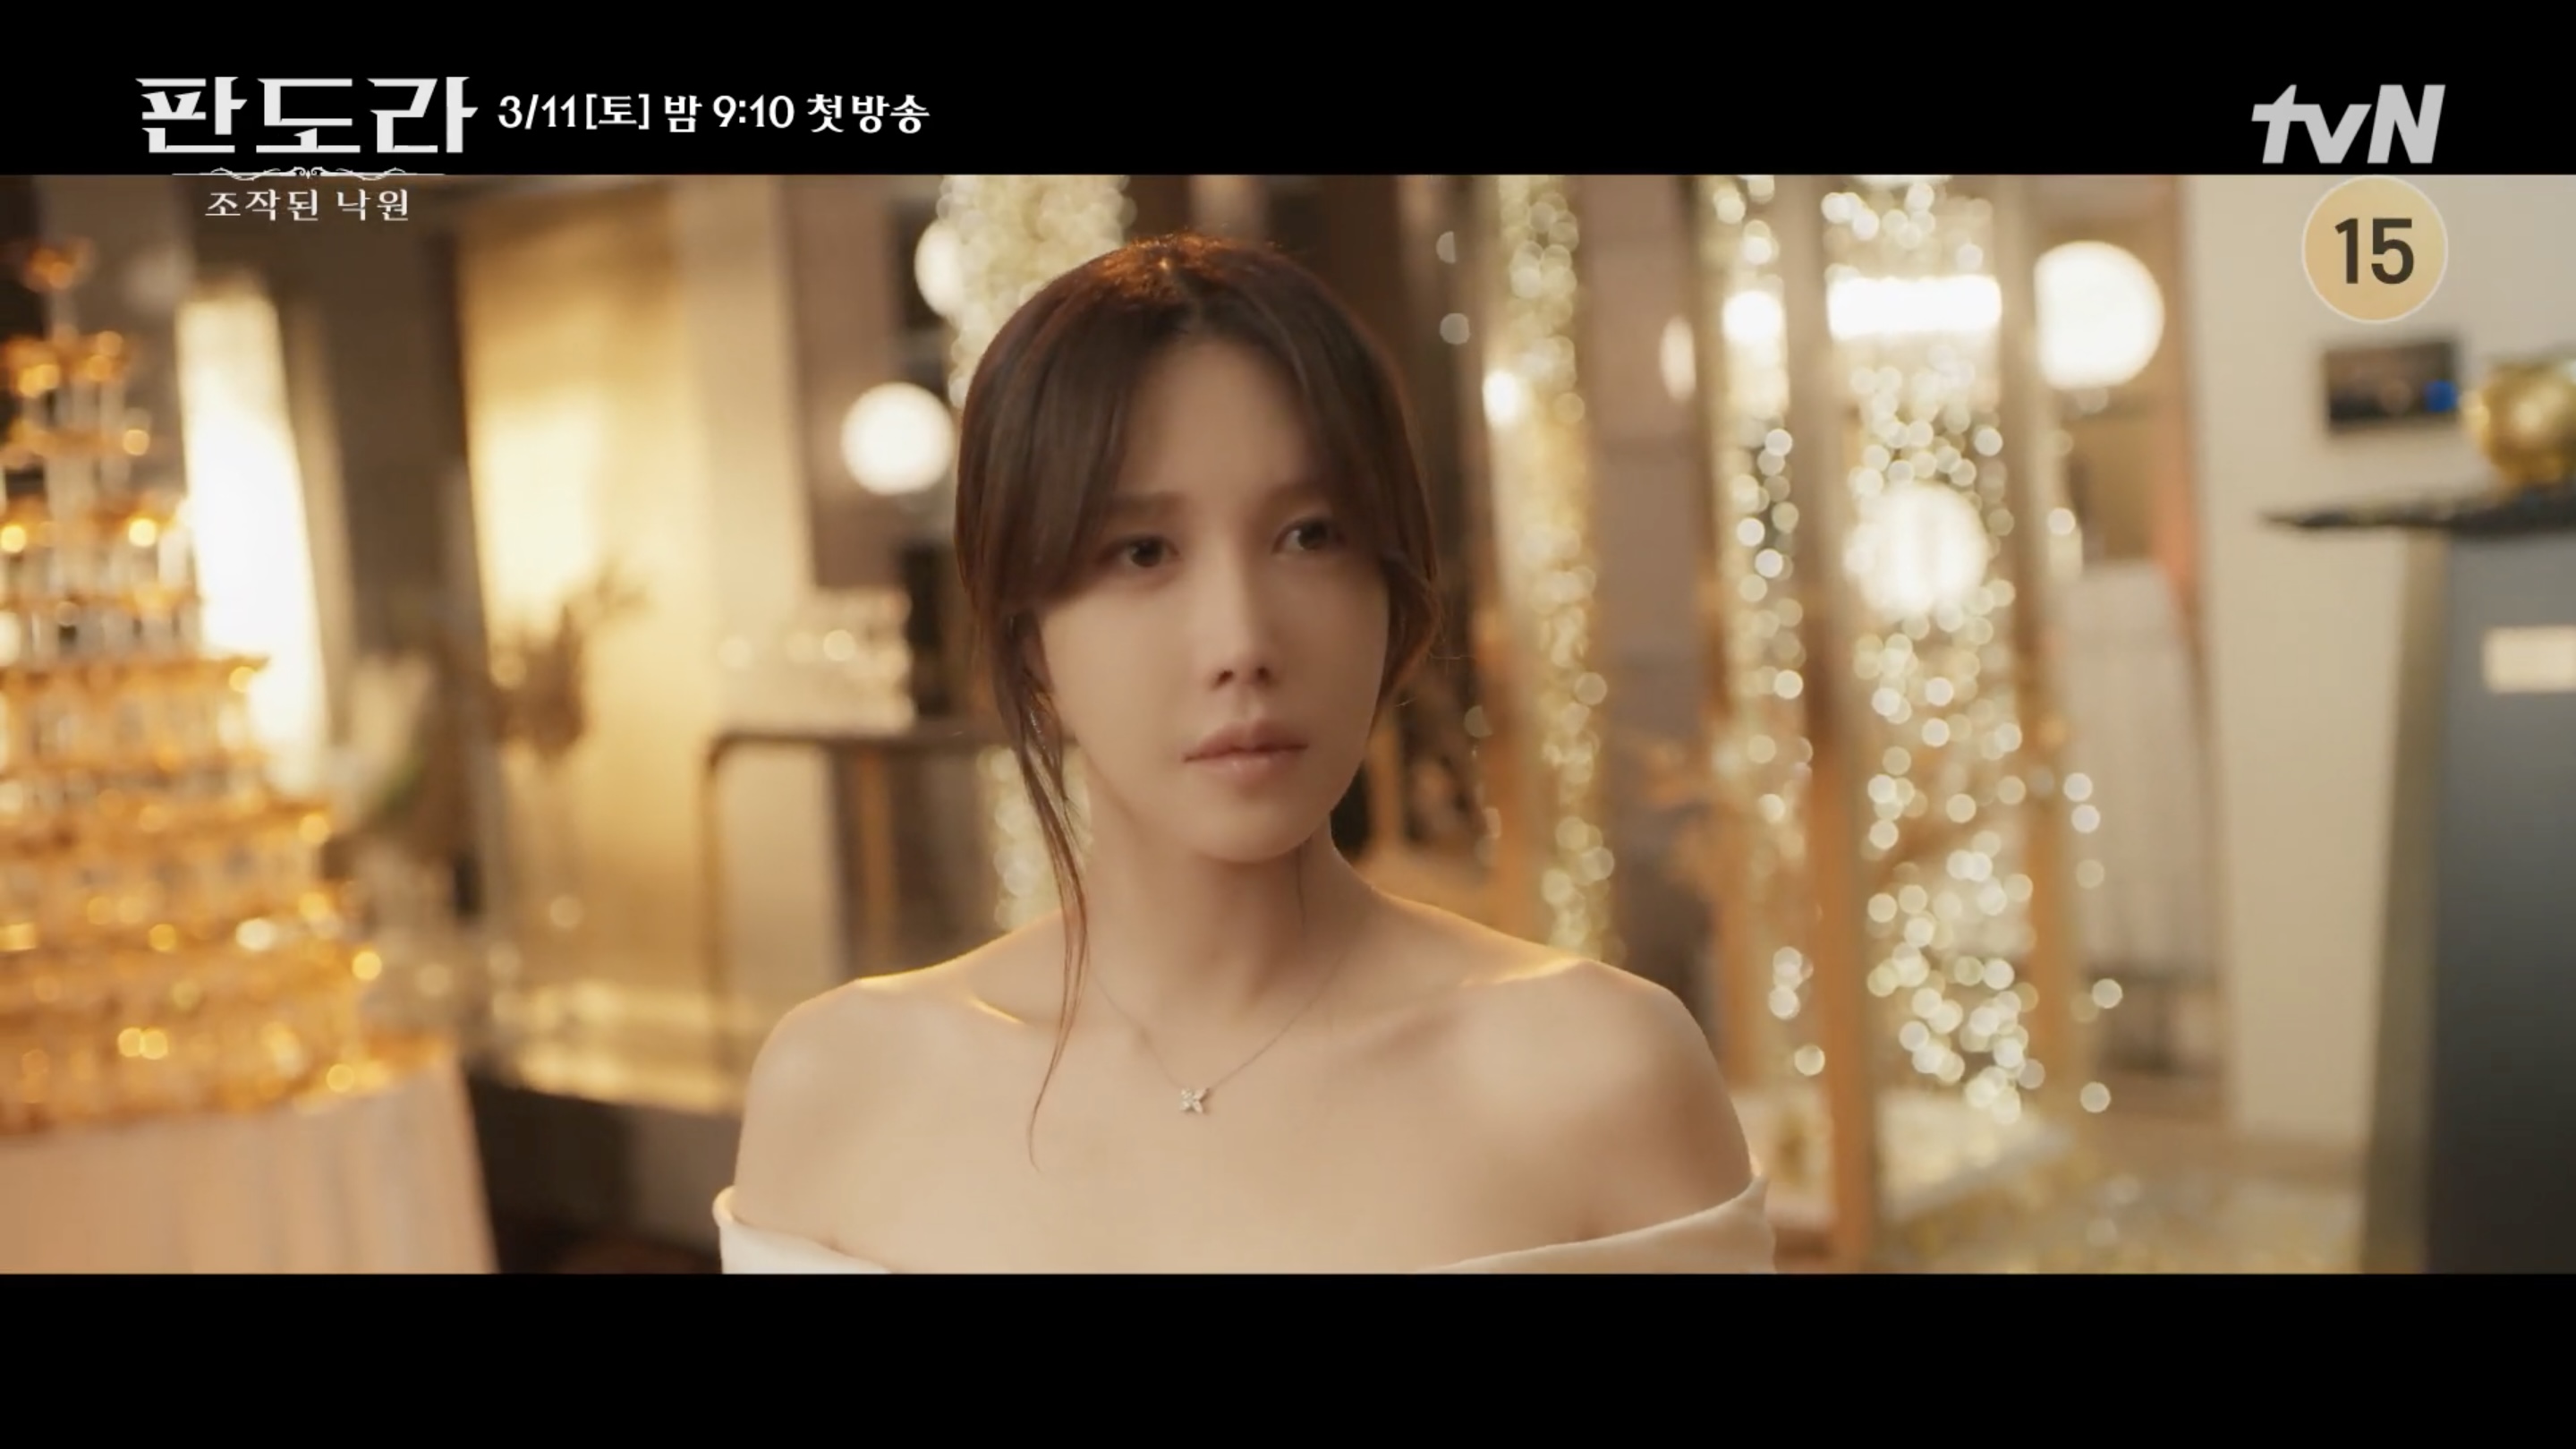 Lee Jia is faced with Pandora's box in first teaser